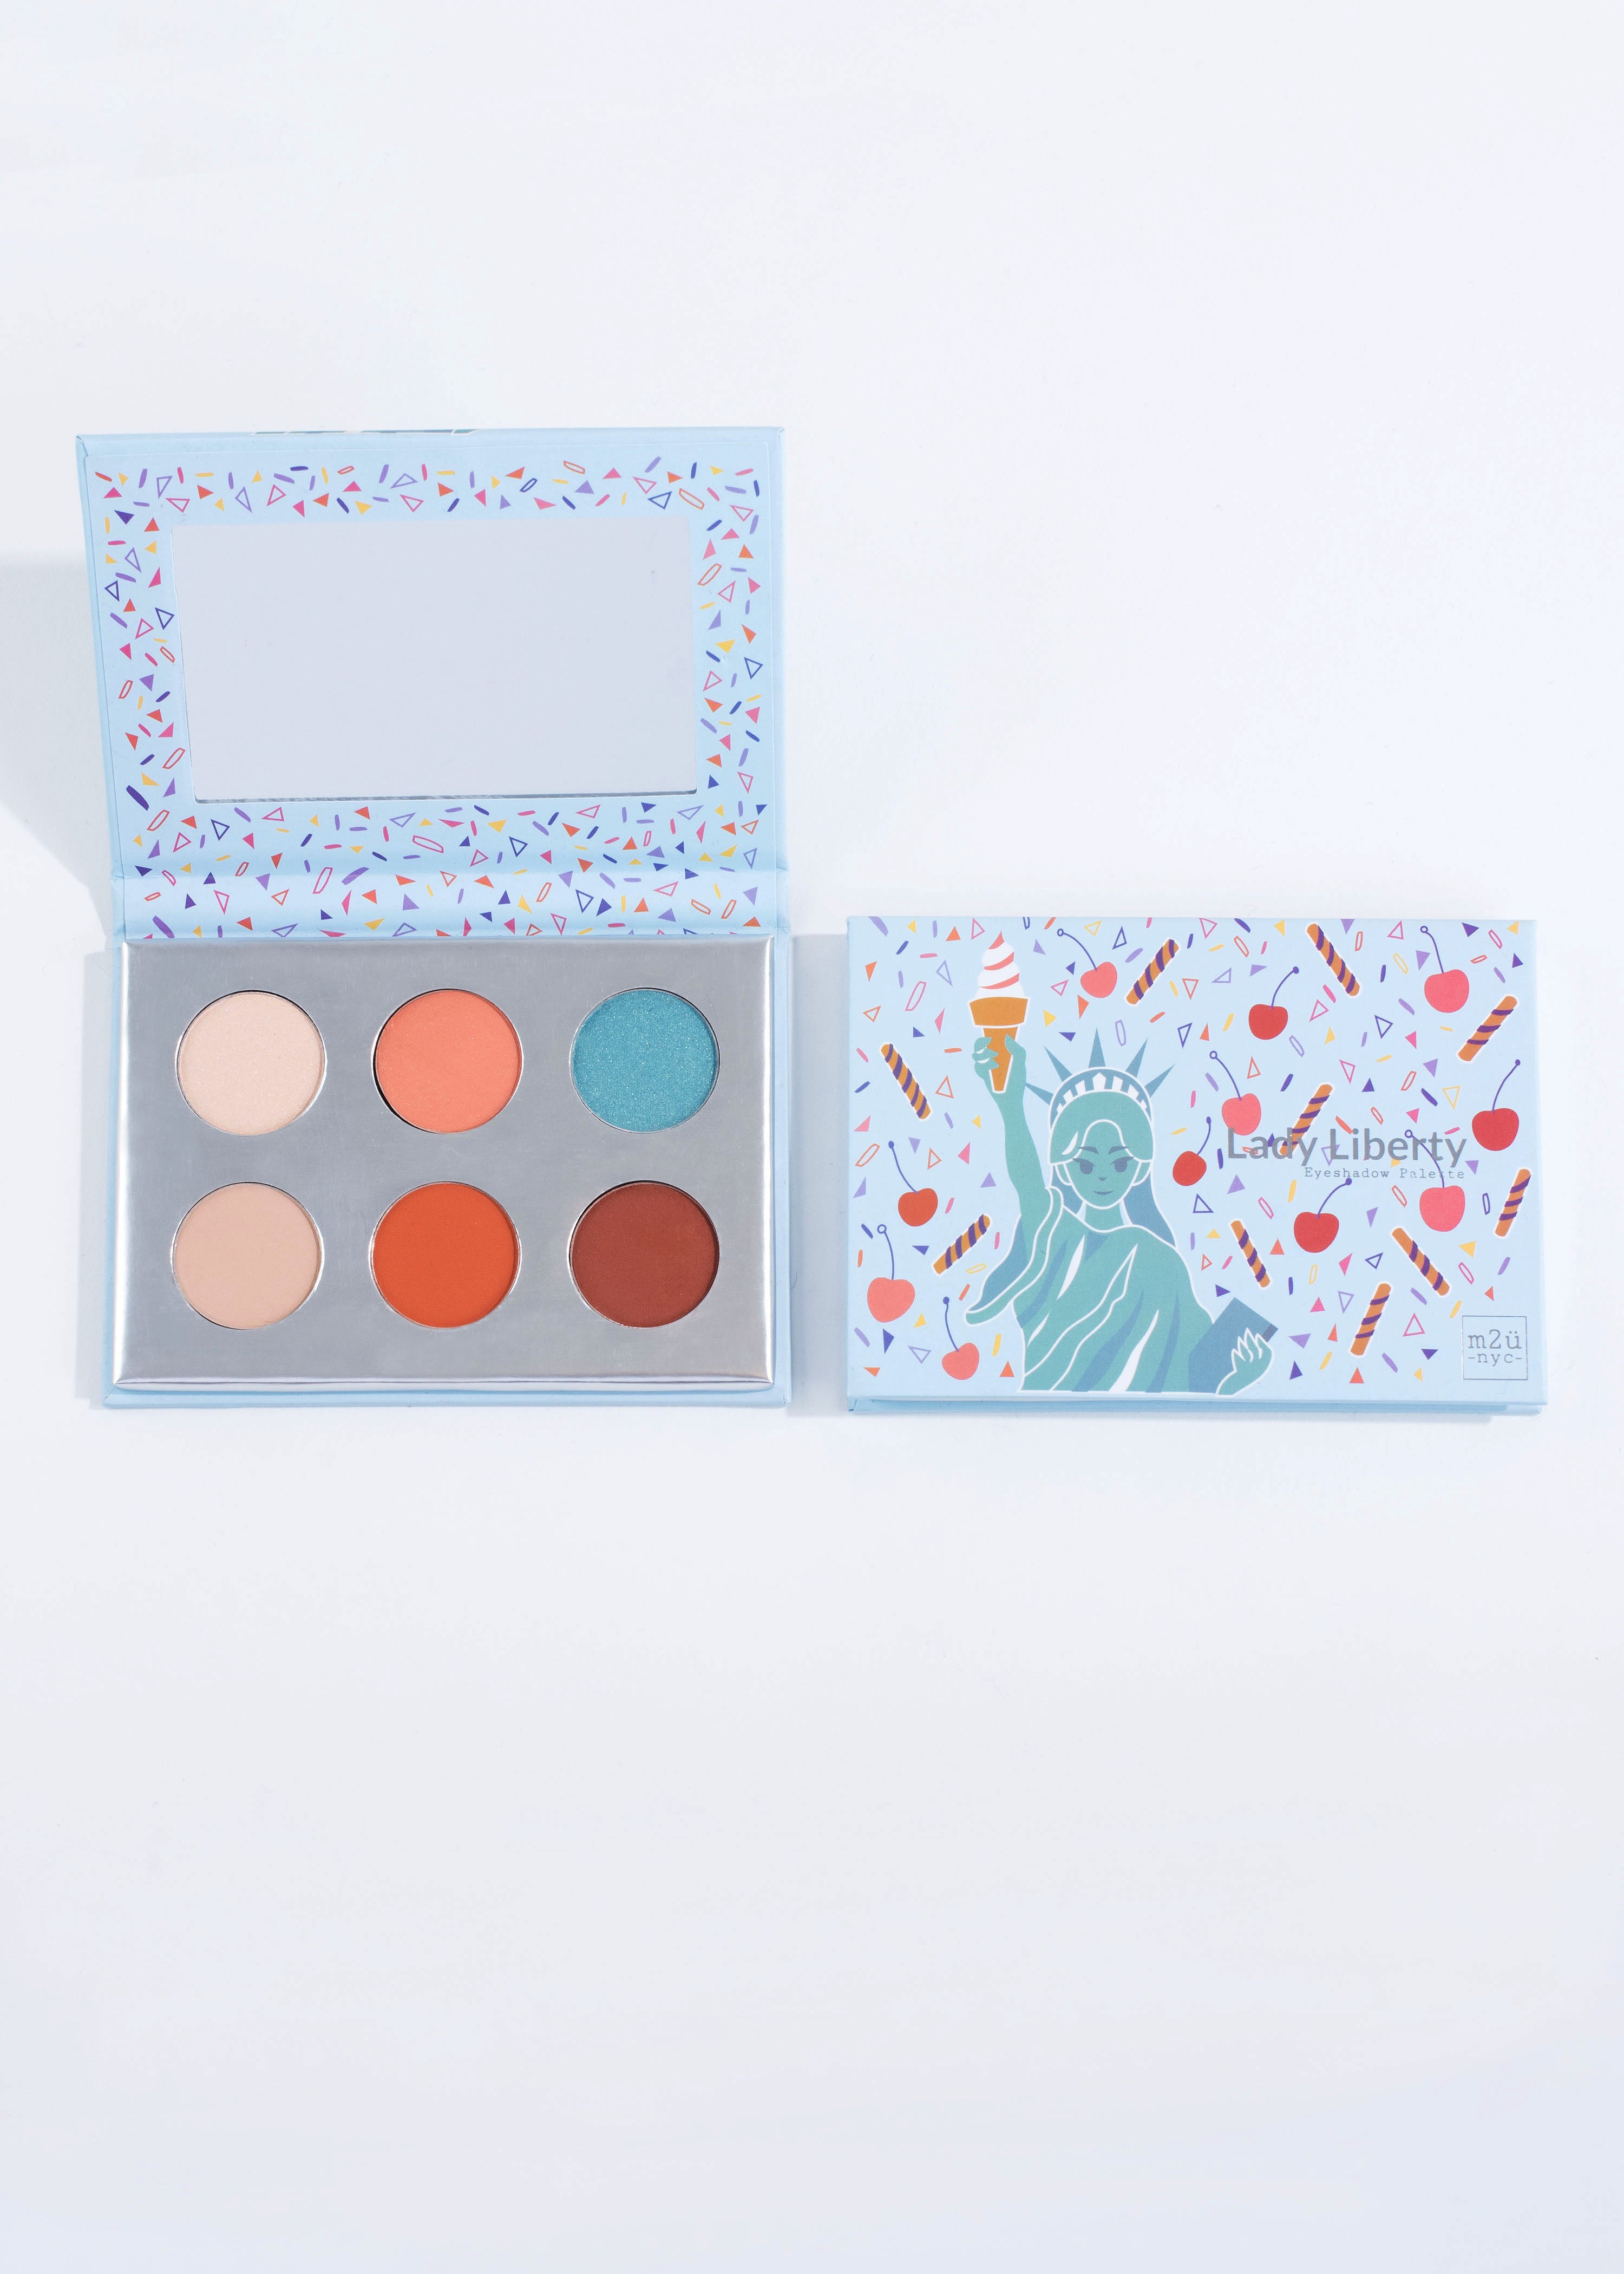 two of the same six pastel shade eyeshadow palette-lady liberty, one open one closed